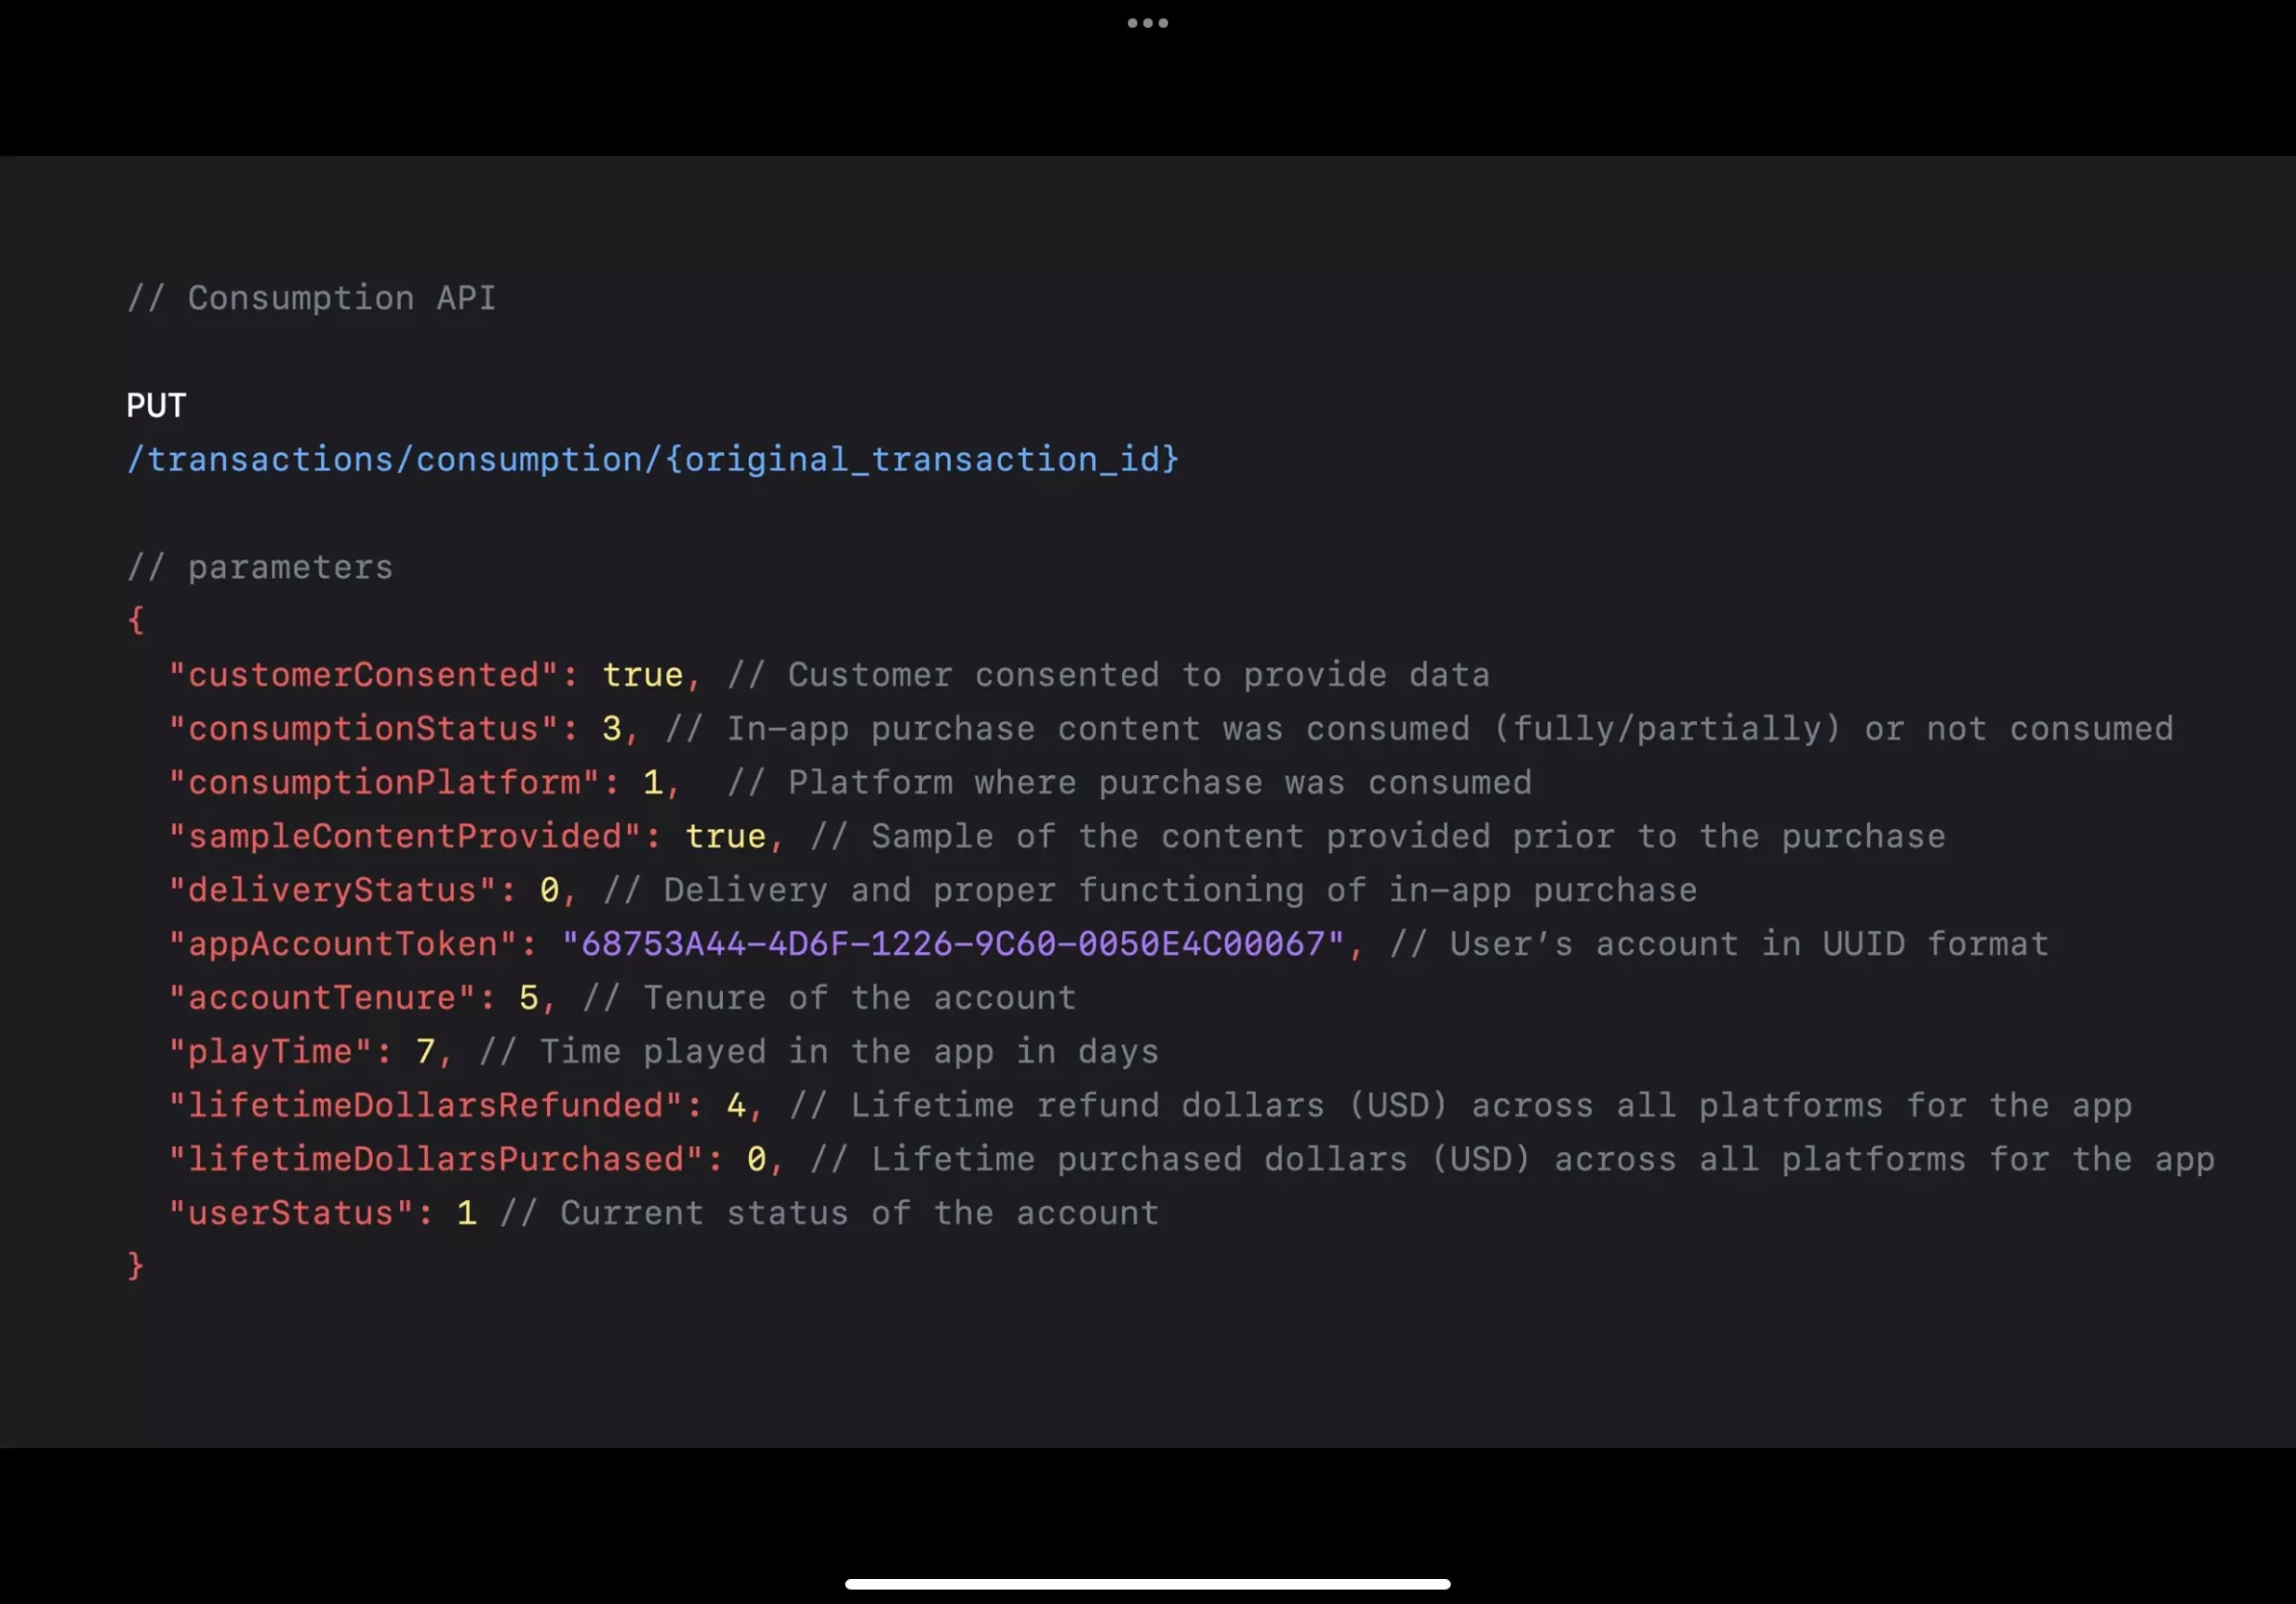 A screenshot from Apple's Support Customers and Handle Refunds video from minute 20.01; that shows the Consumption API call that must be returned to apple along with the information. This includes Customer Consented, Consumption Status, consumption platform, sample content provided, delivery status, app account token, account tenure, play time, lifetime dollars refunded, lifetime dollars purchased and wether they are active on your app.